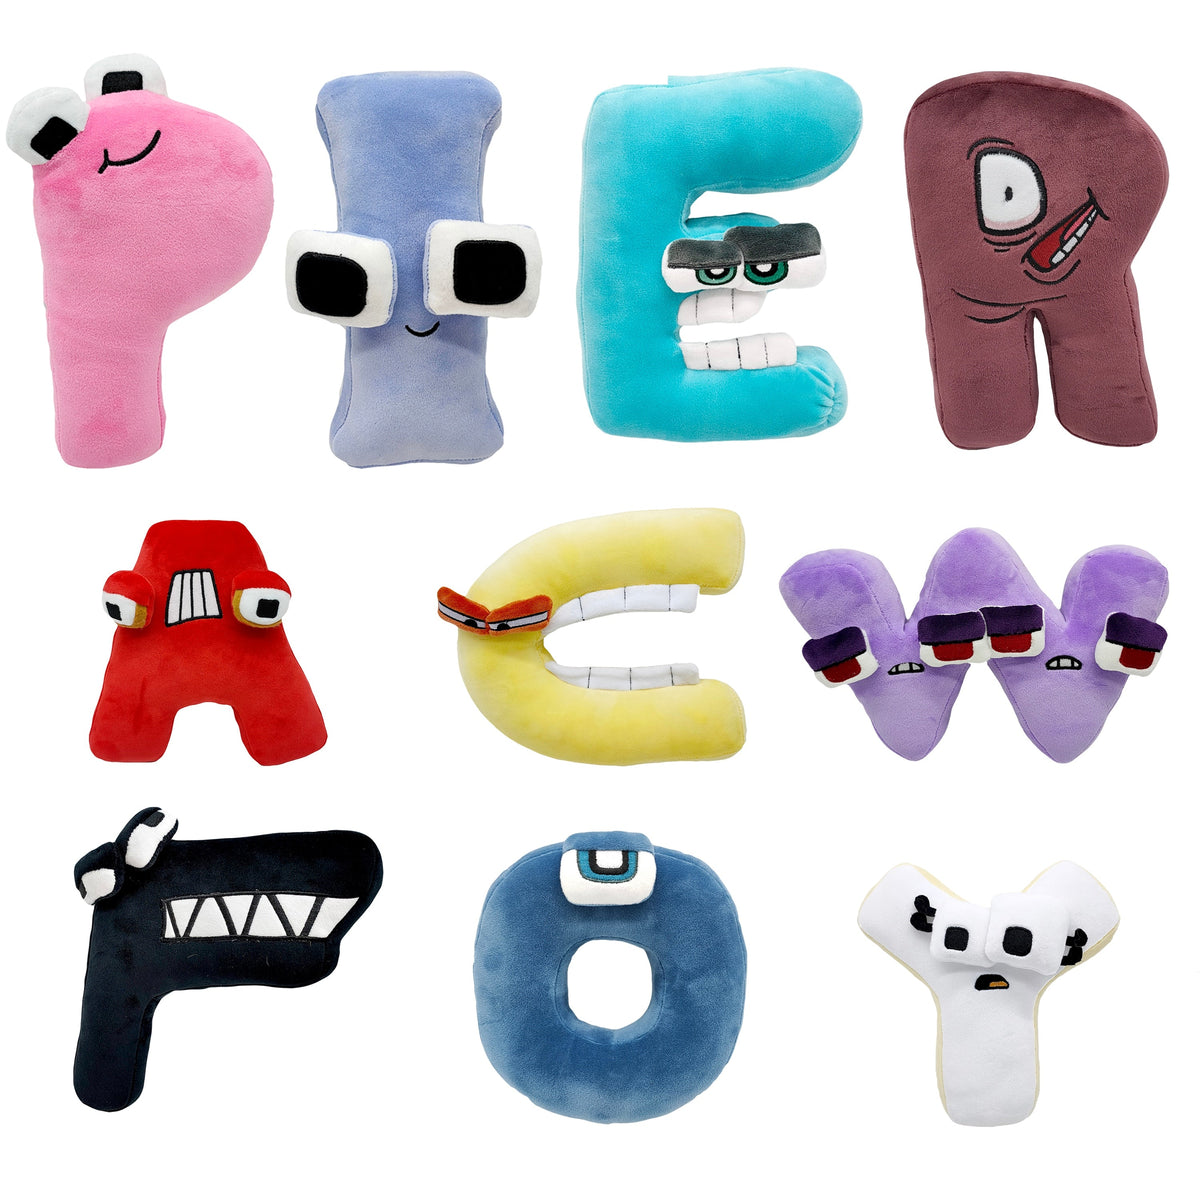 Cute Letter Pillow Alphabet Lore But are Plush Toy Stuffed Animal Plushie Doll Toys Gift for Kids Children